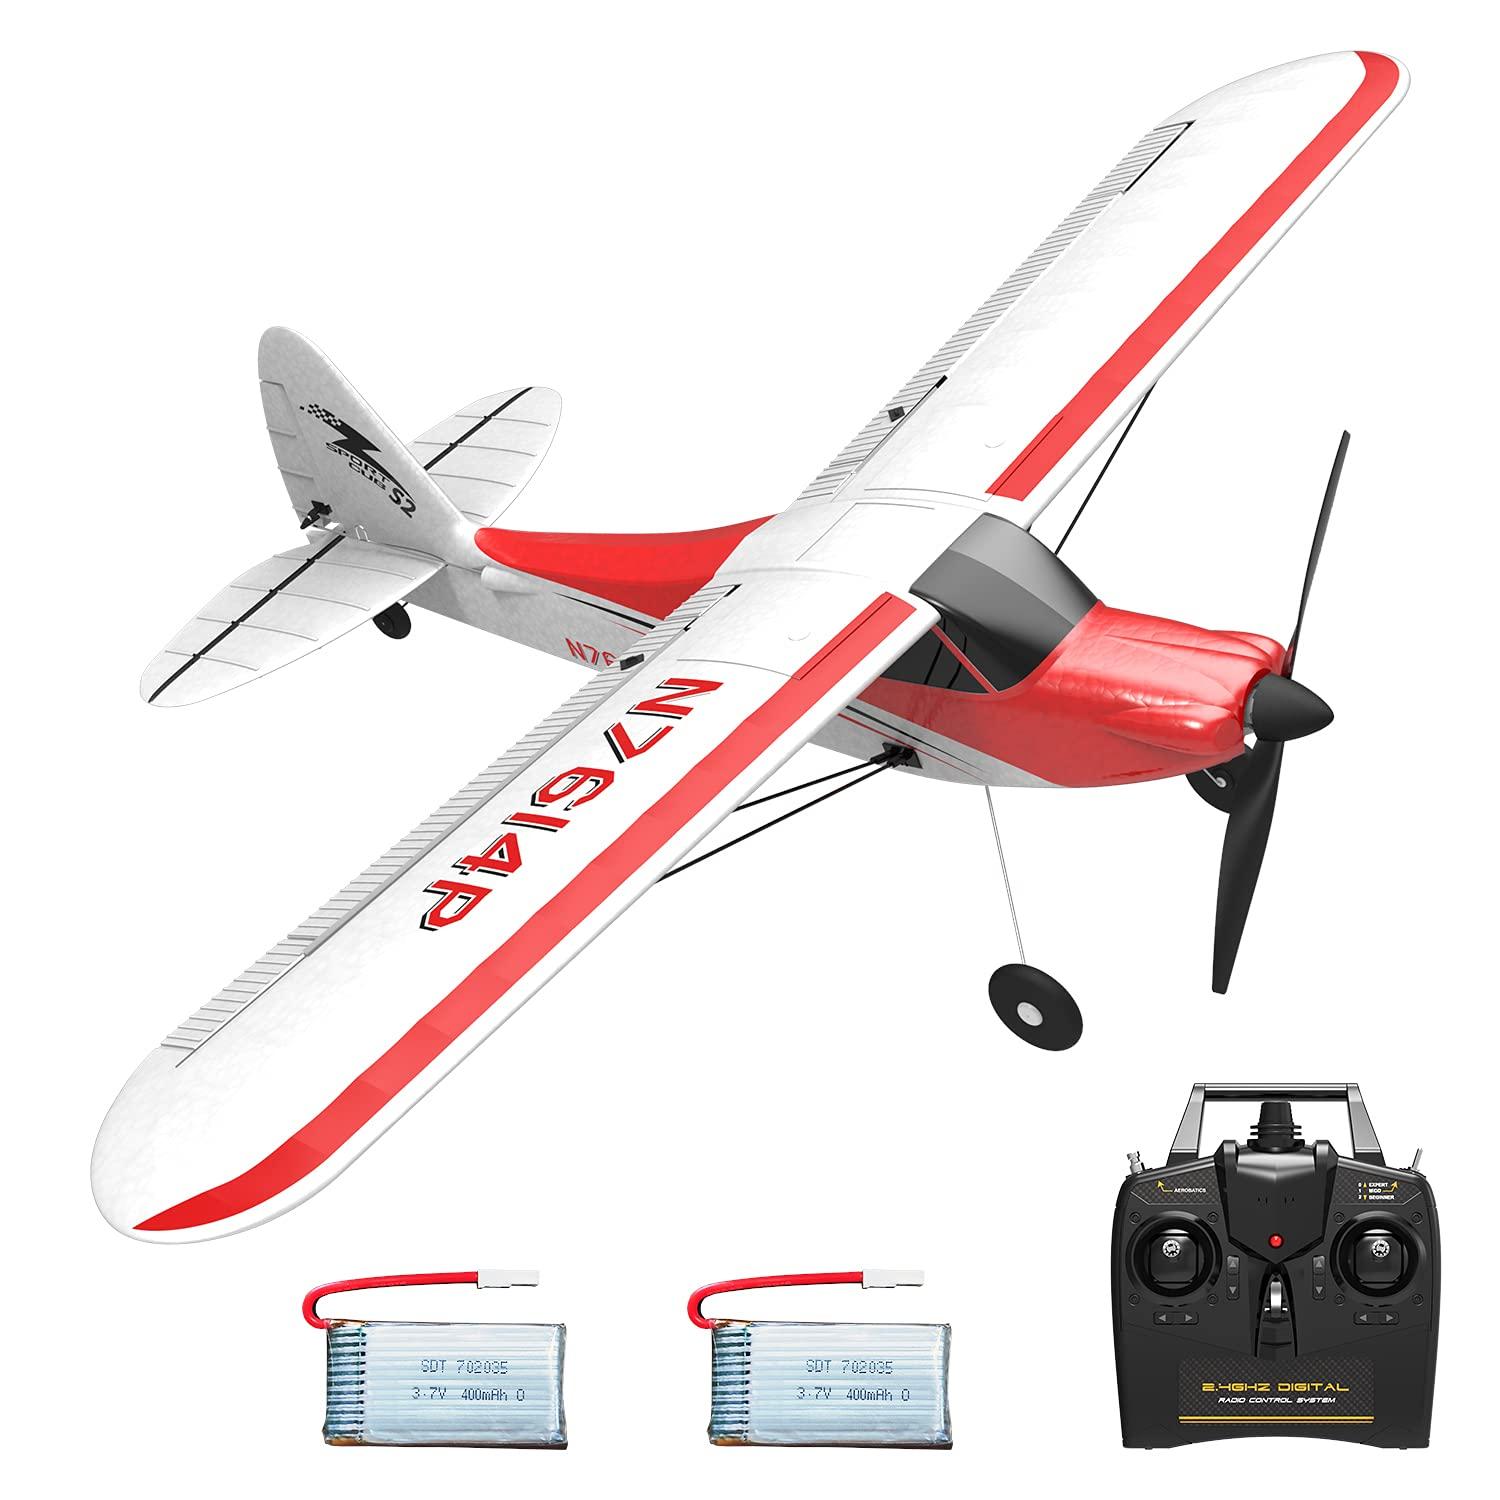 Best Rc Glider For Beginners: Top Features of HobbyZone Champ S+ RTF RC Glider for Beginners